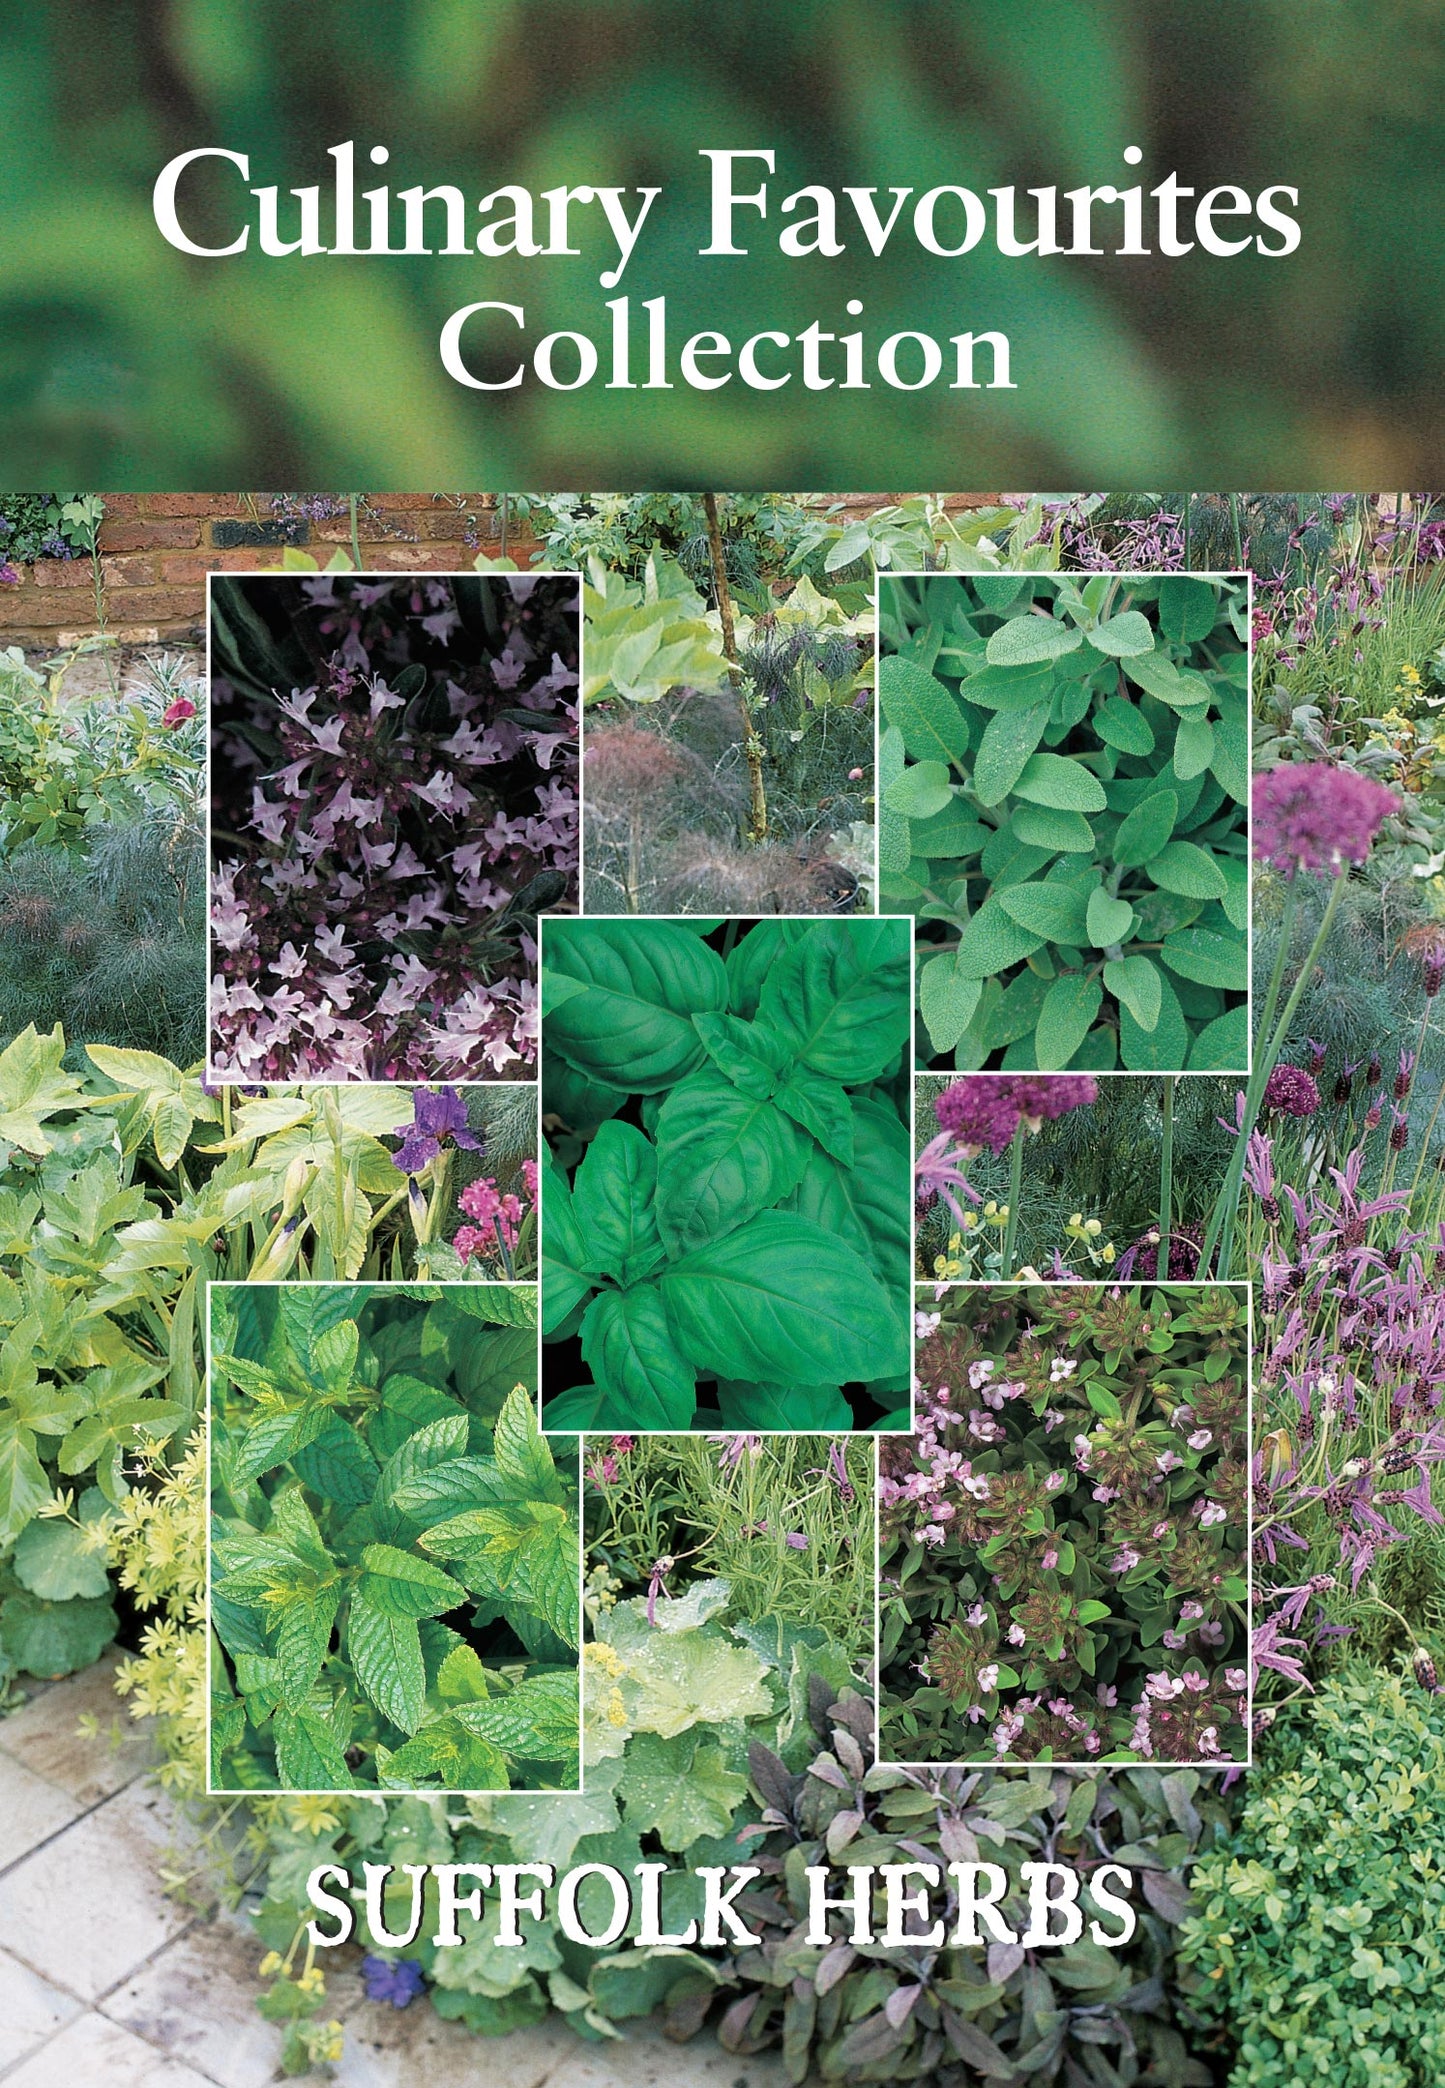 Suffolk Herbs Culinary Favourites Collection Pack Seed